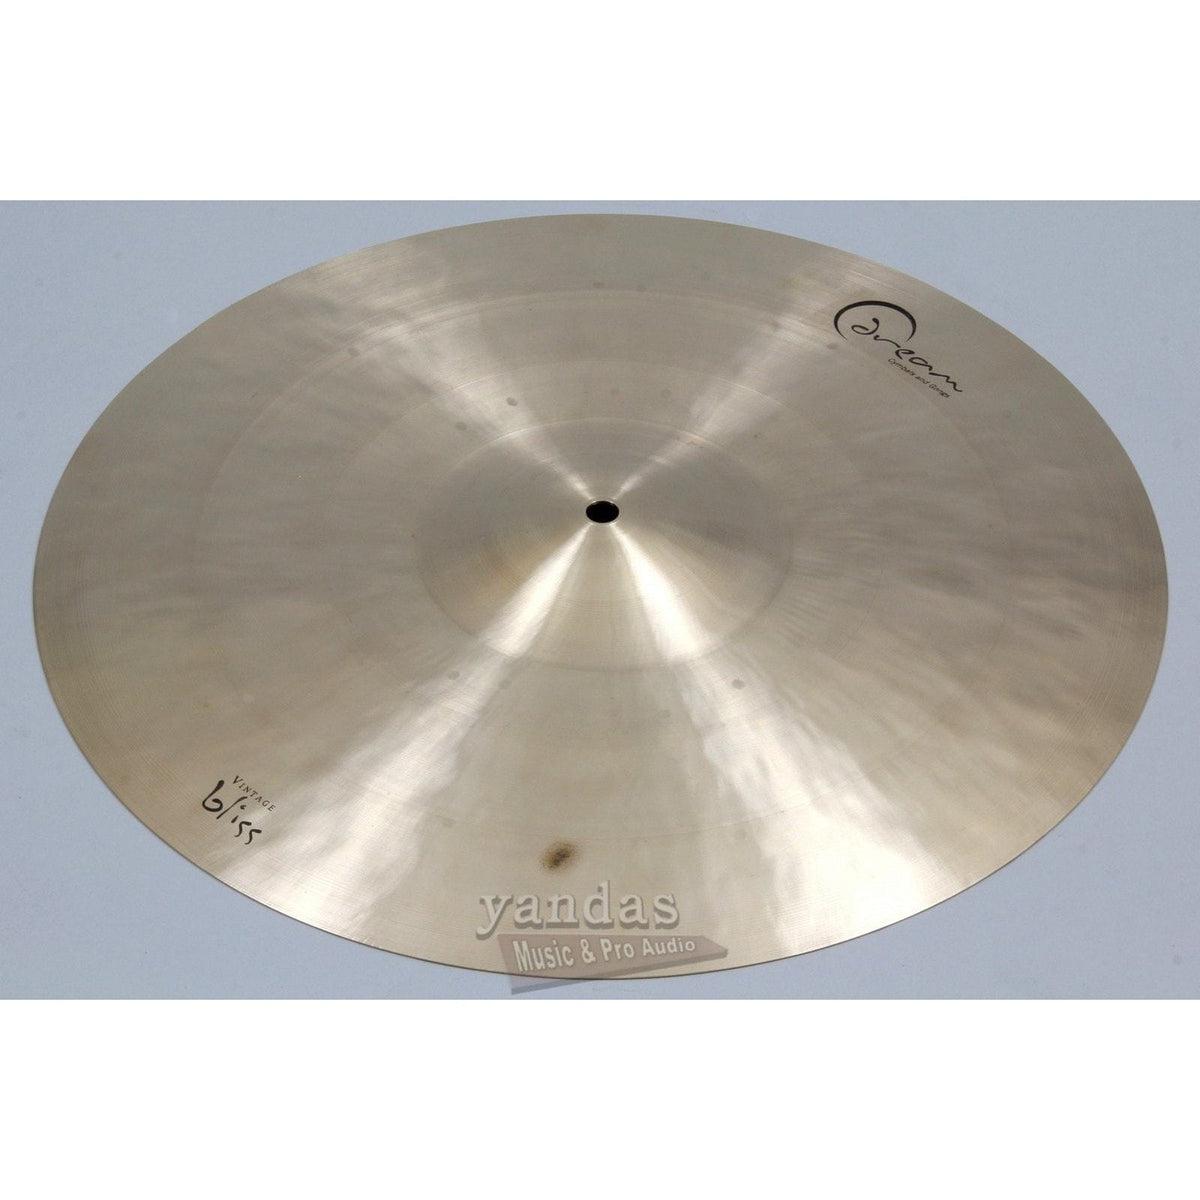 Dream Cymbals Vintage Bliss Crash/Ride Cymbal 17 Inch